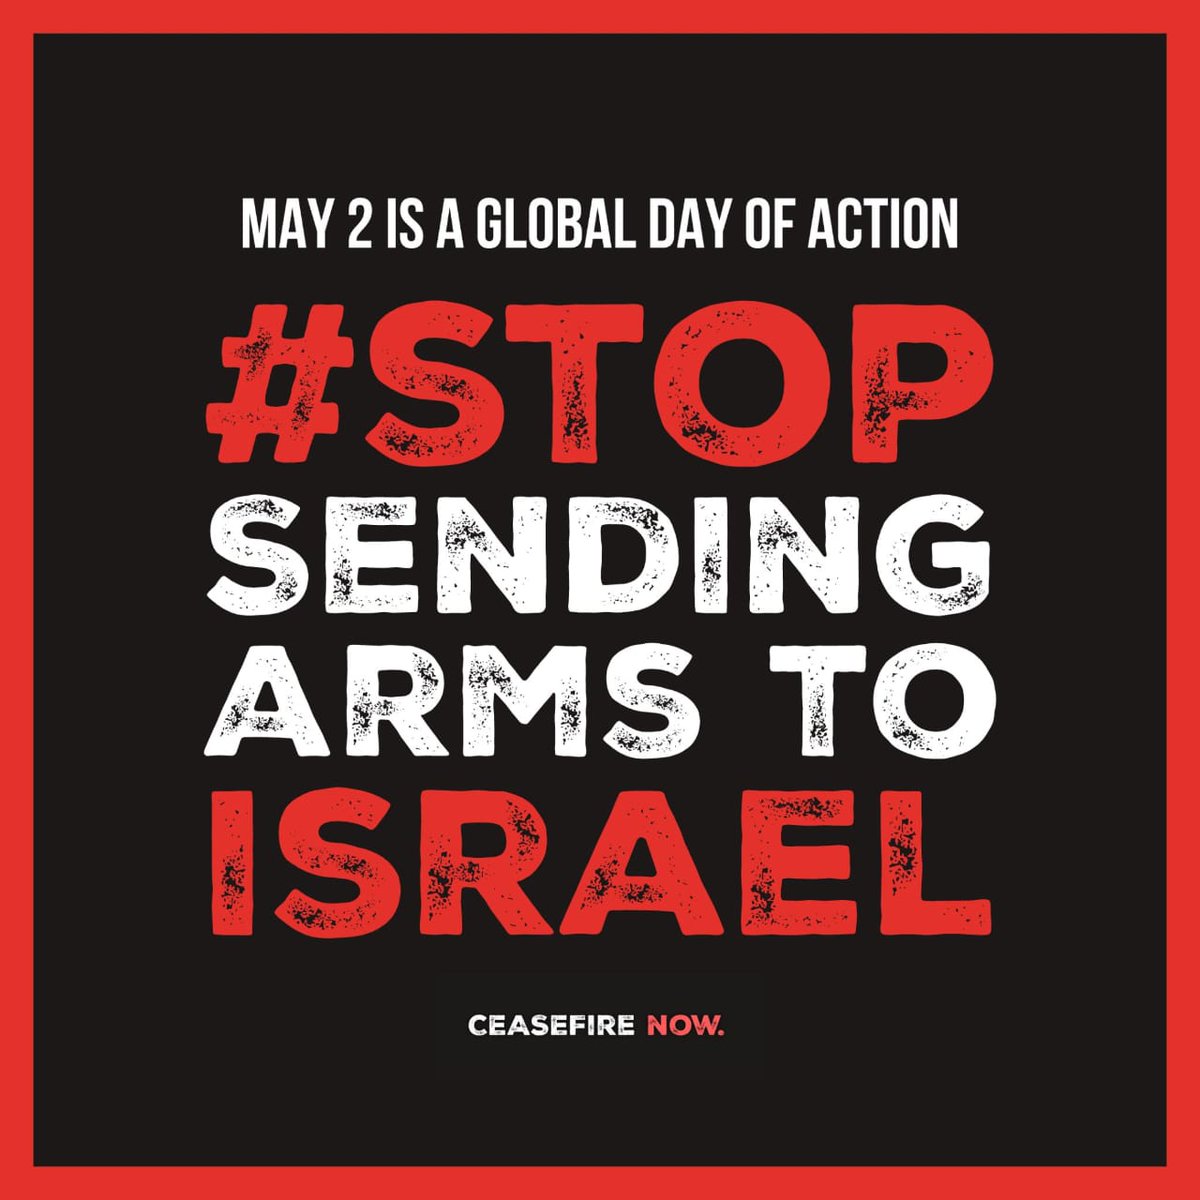 🛑 Arms sales and transfers to Israel MUST STOP and steps towards an immediate sustained ceasefire must begin. End the human suffering in Gaza and Lebanon now! #StopSendingArms #CeasefireNOW @JesuitRefugee @jrsusa